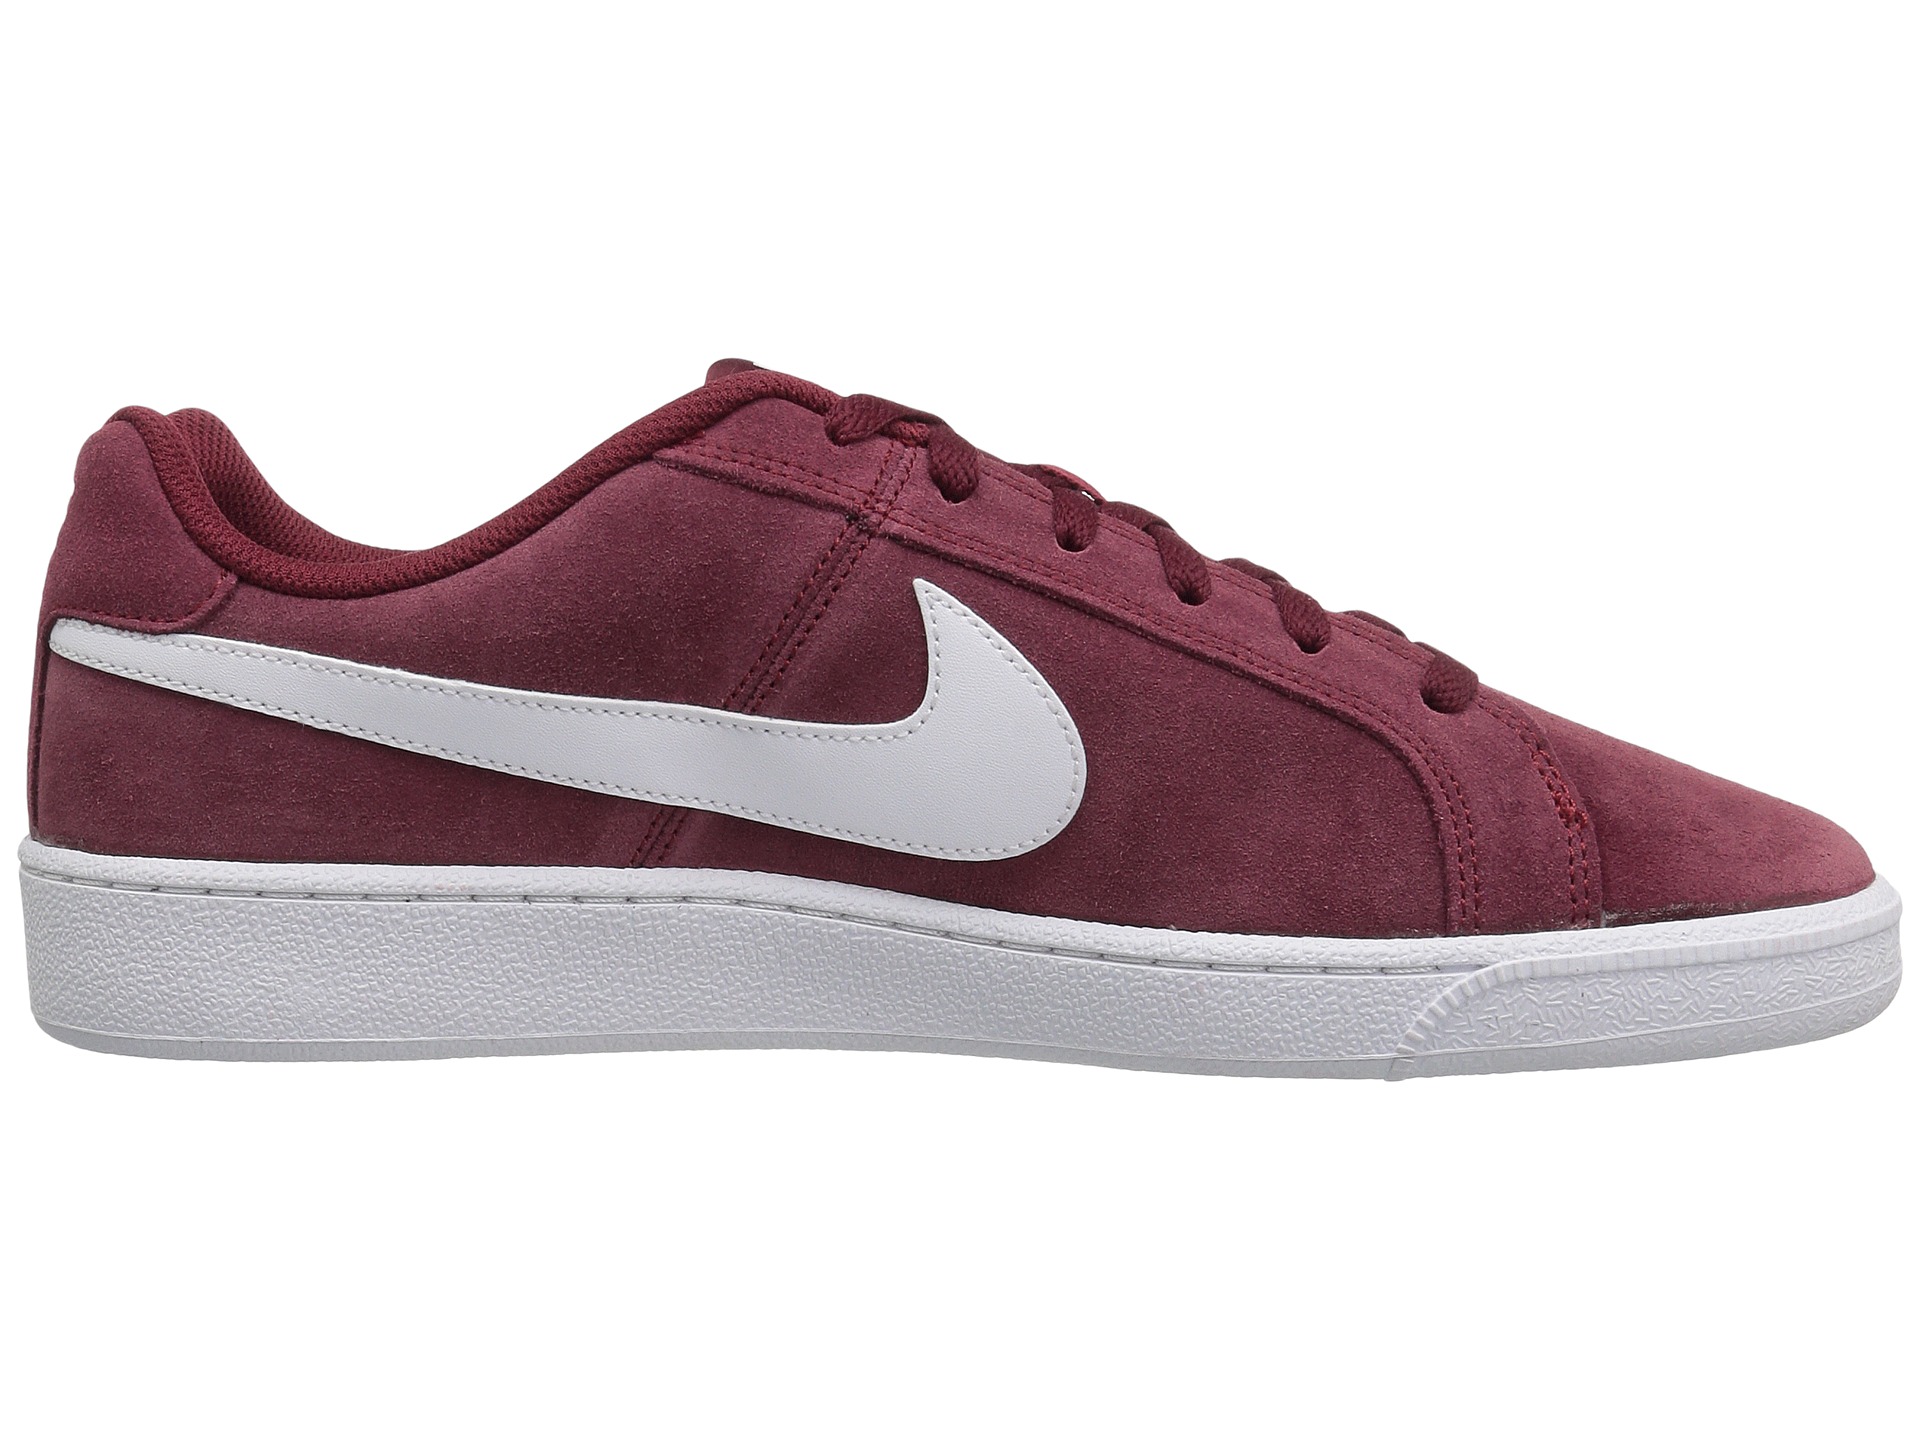 Nike Court Royale Suede - Zappos.com Free Shipping BOTH Ways